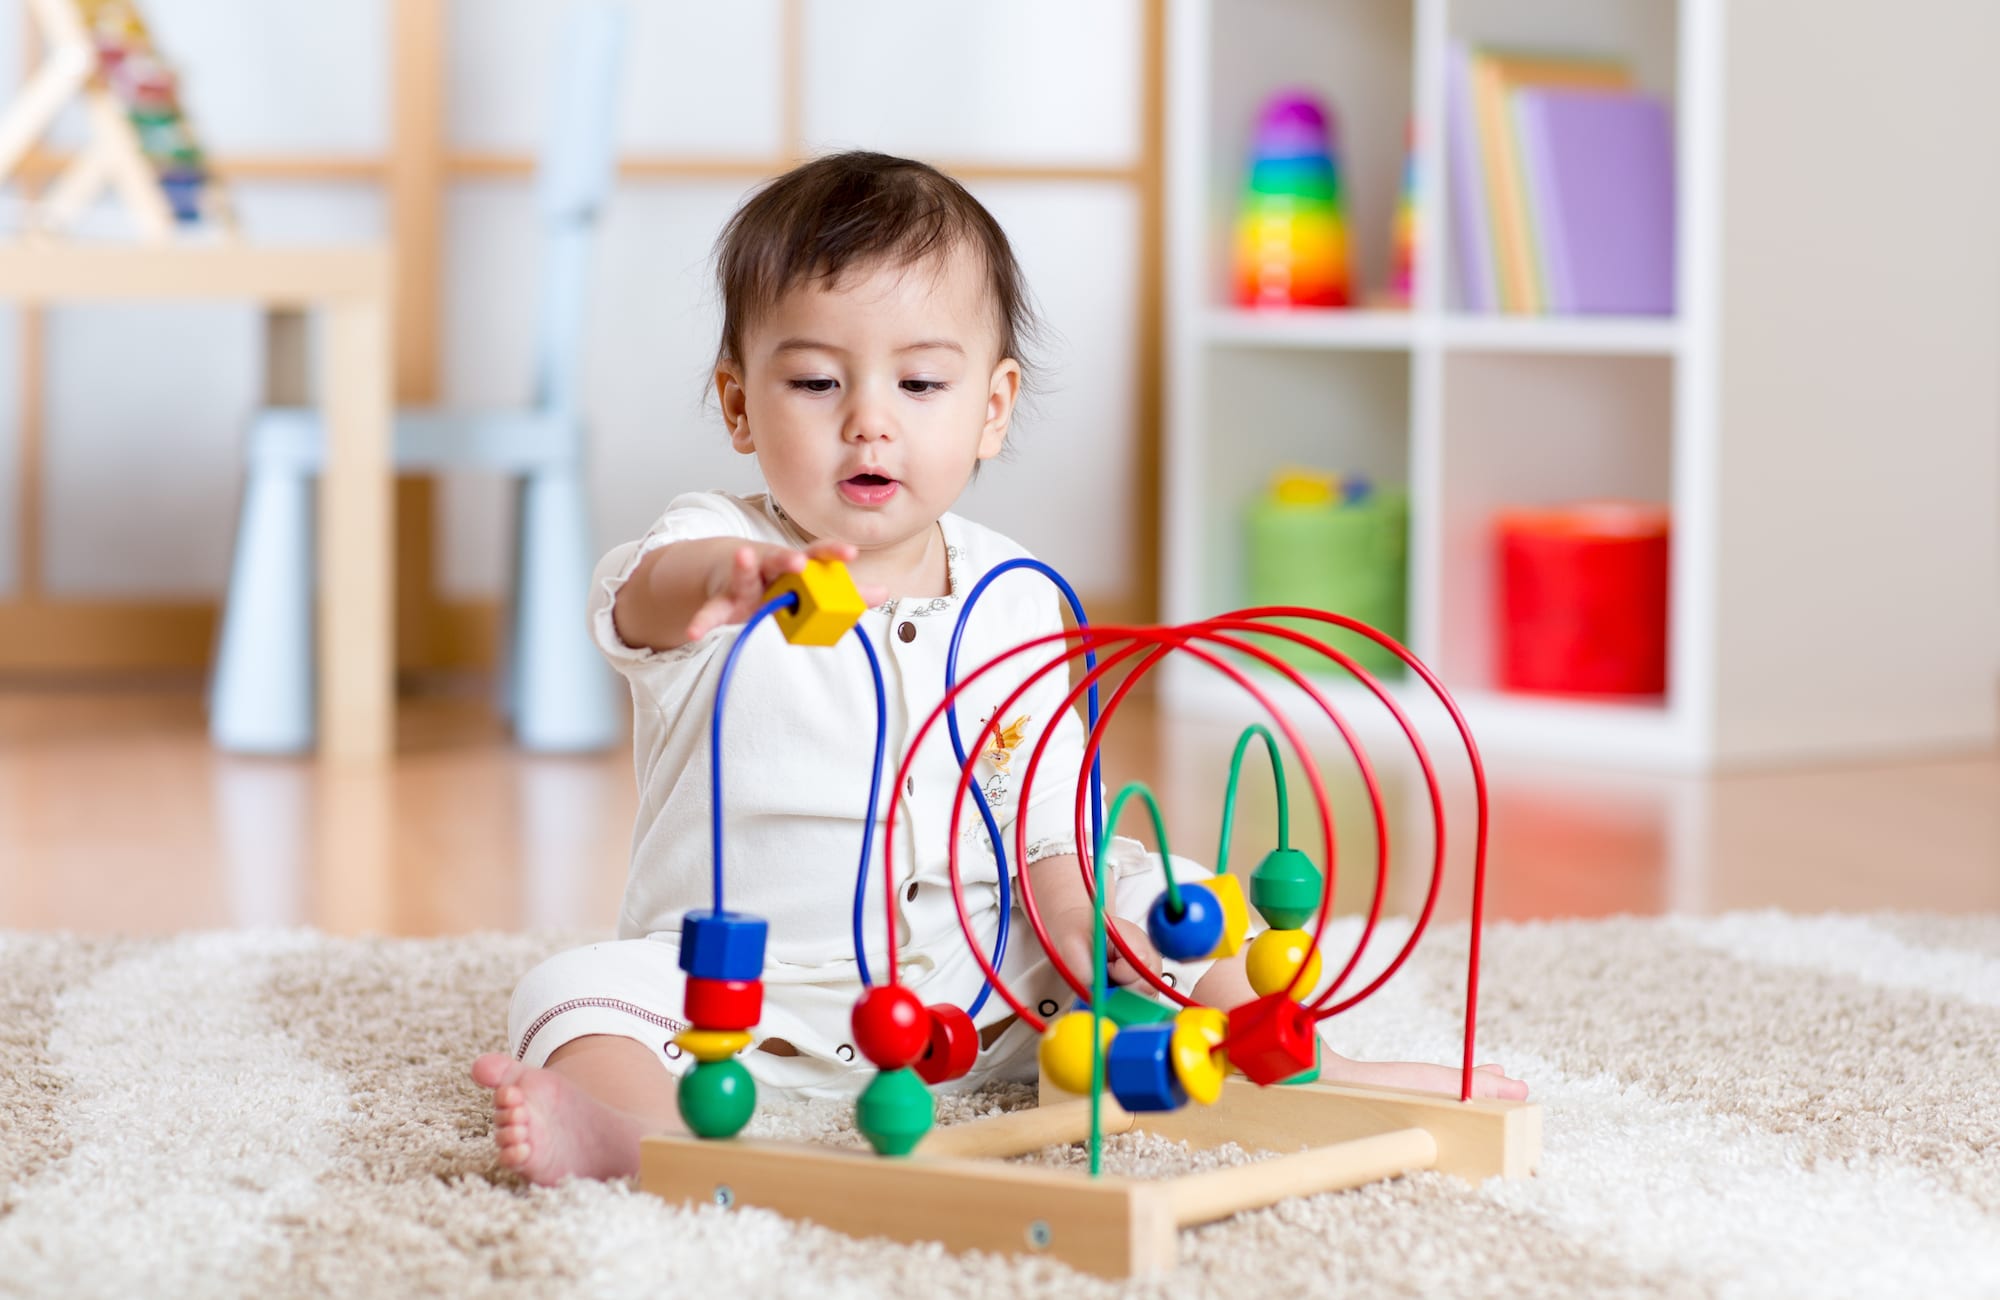 Baby Early Development Toys: A Guide